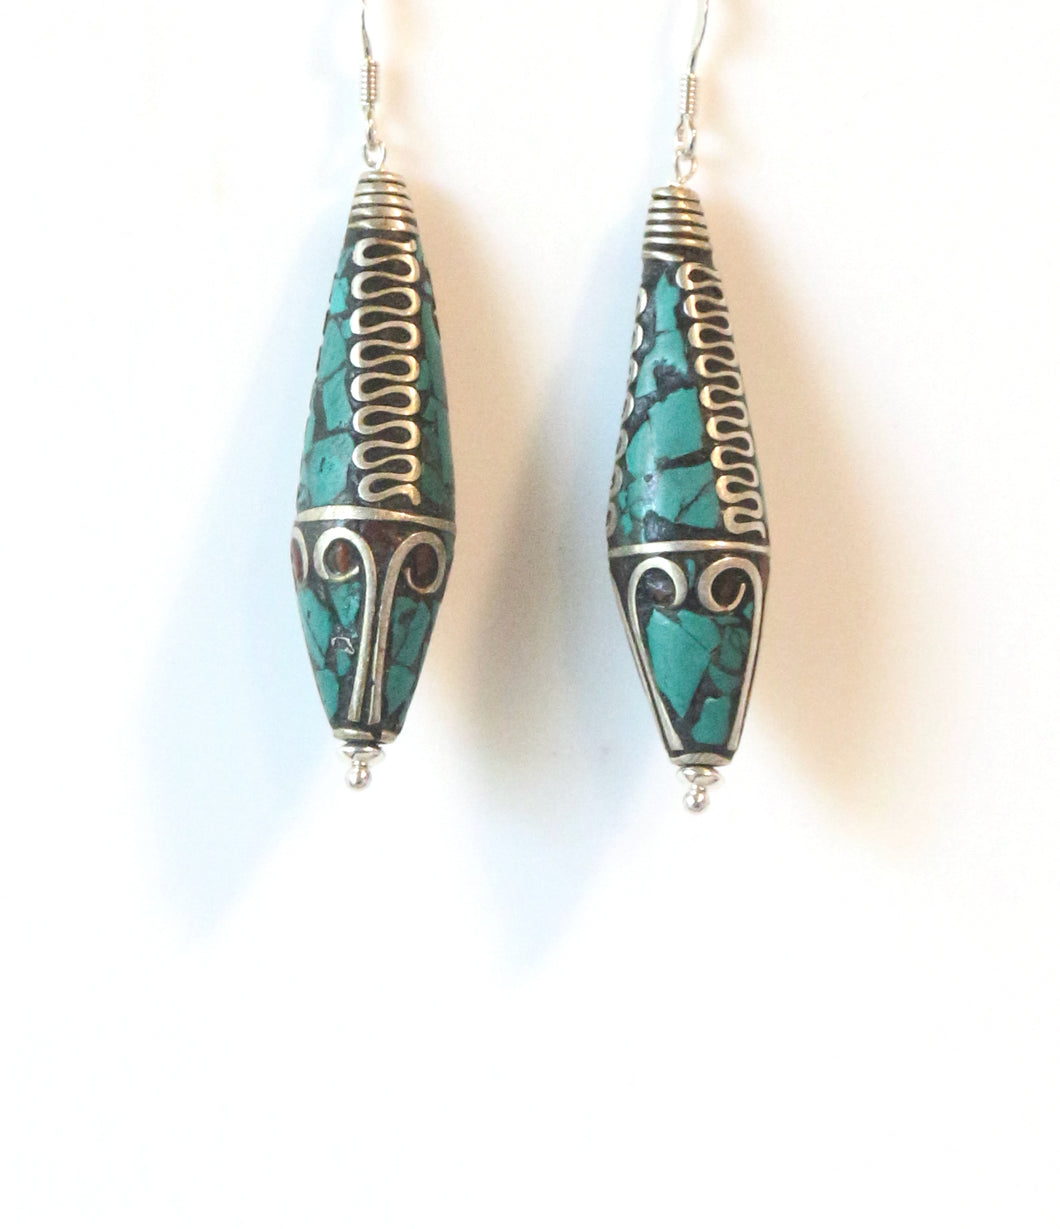 Nepalese Bead Earrings with Turquoise and Sterling Silver